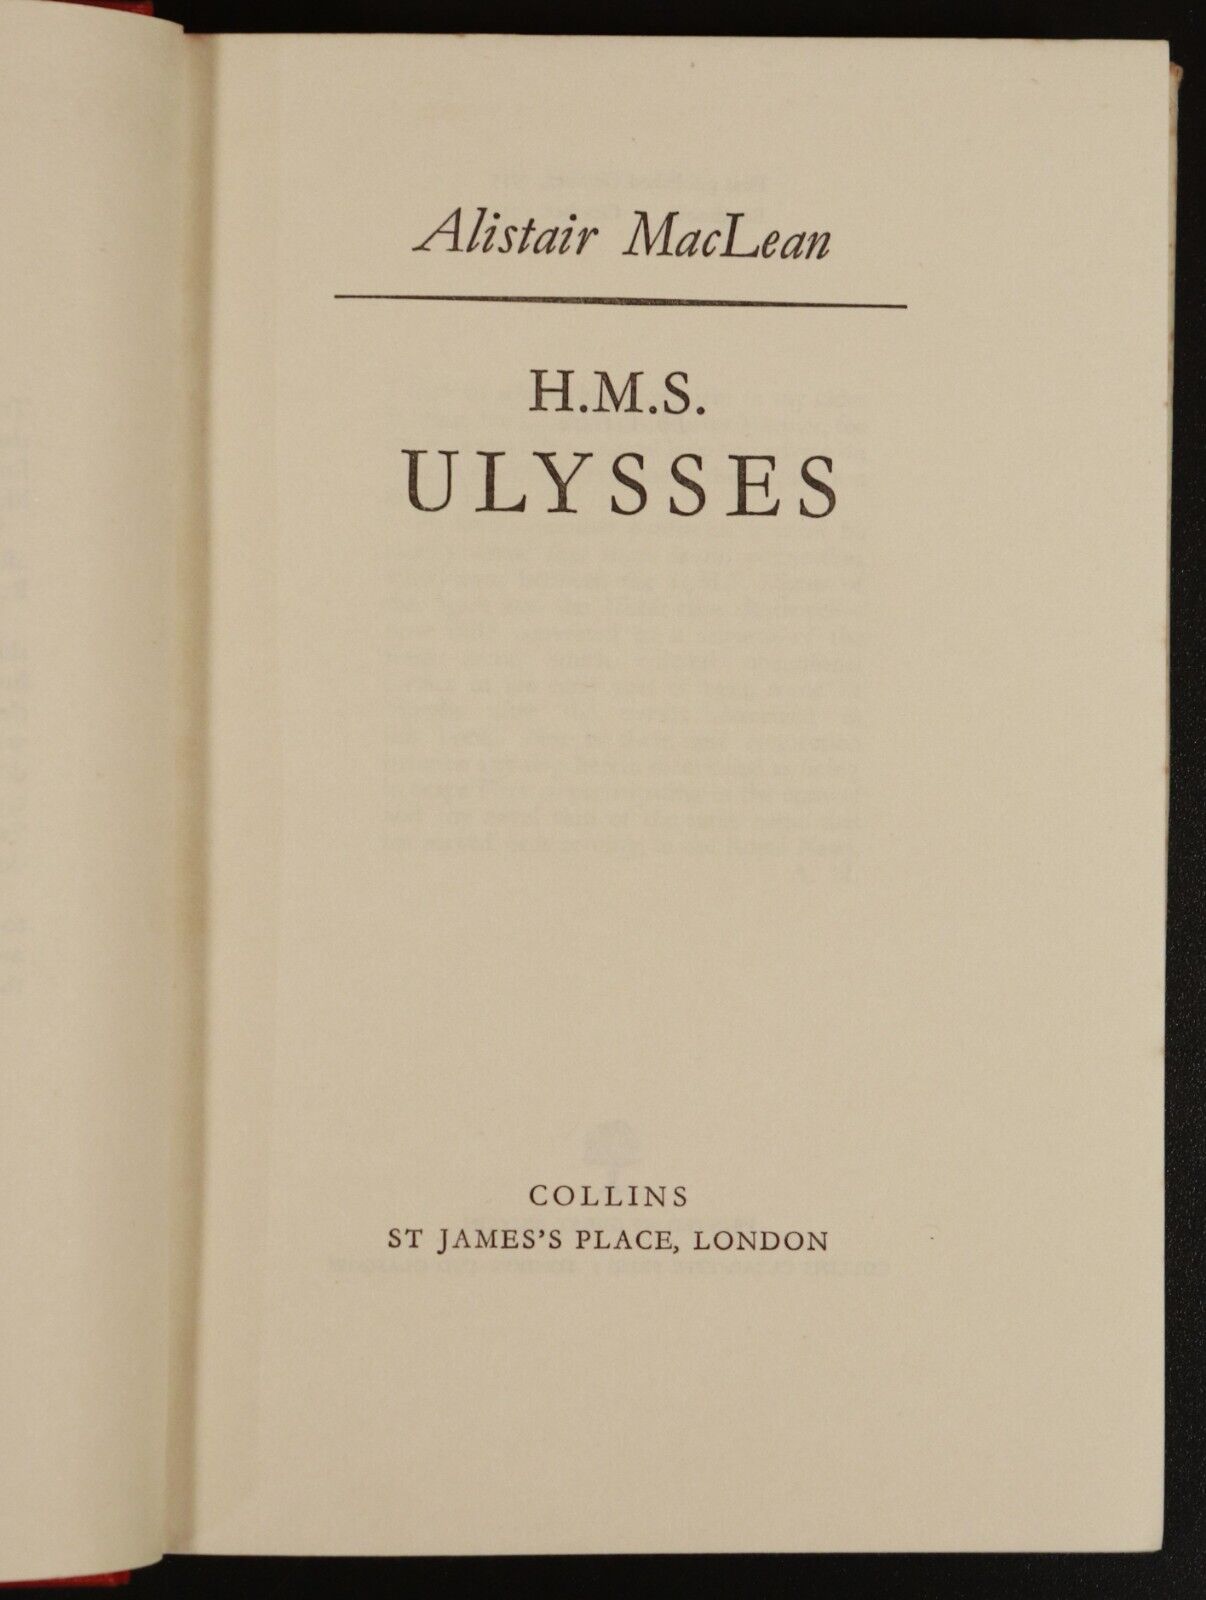 1955 H.M.S. Ulysses by Alistair MacLean Vintage Military Fiction Book